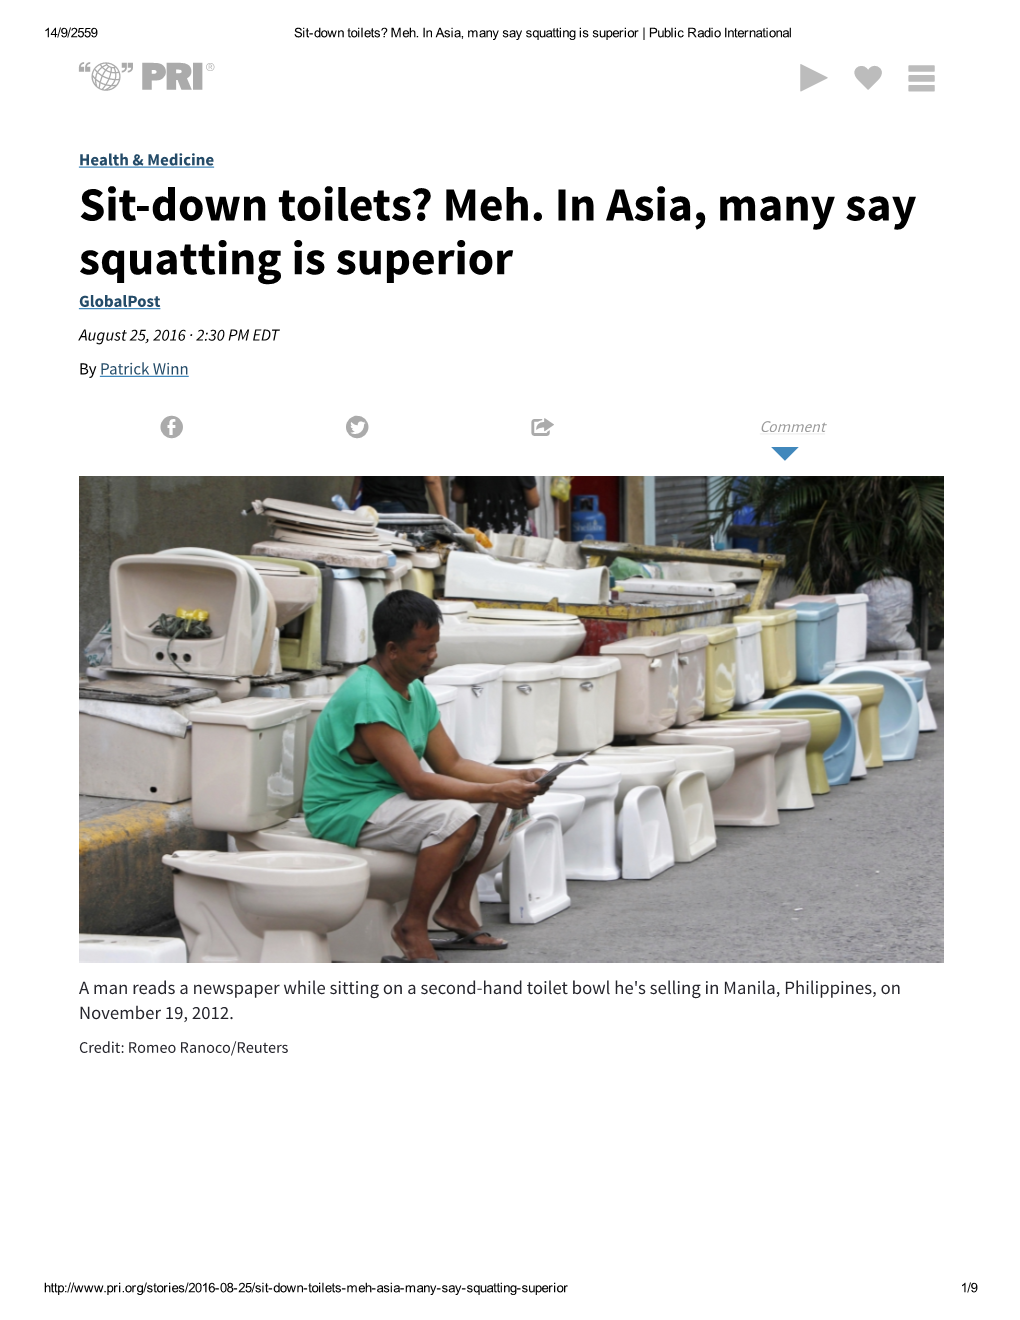 Sit-Down Toilets? Meh. in Asia, Many Say Squatting Is Superior Globalpost